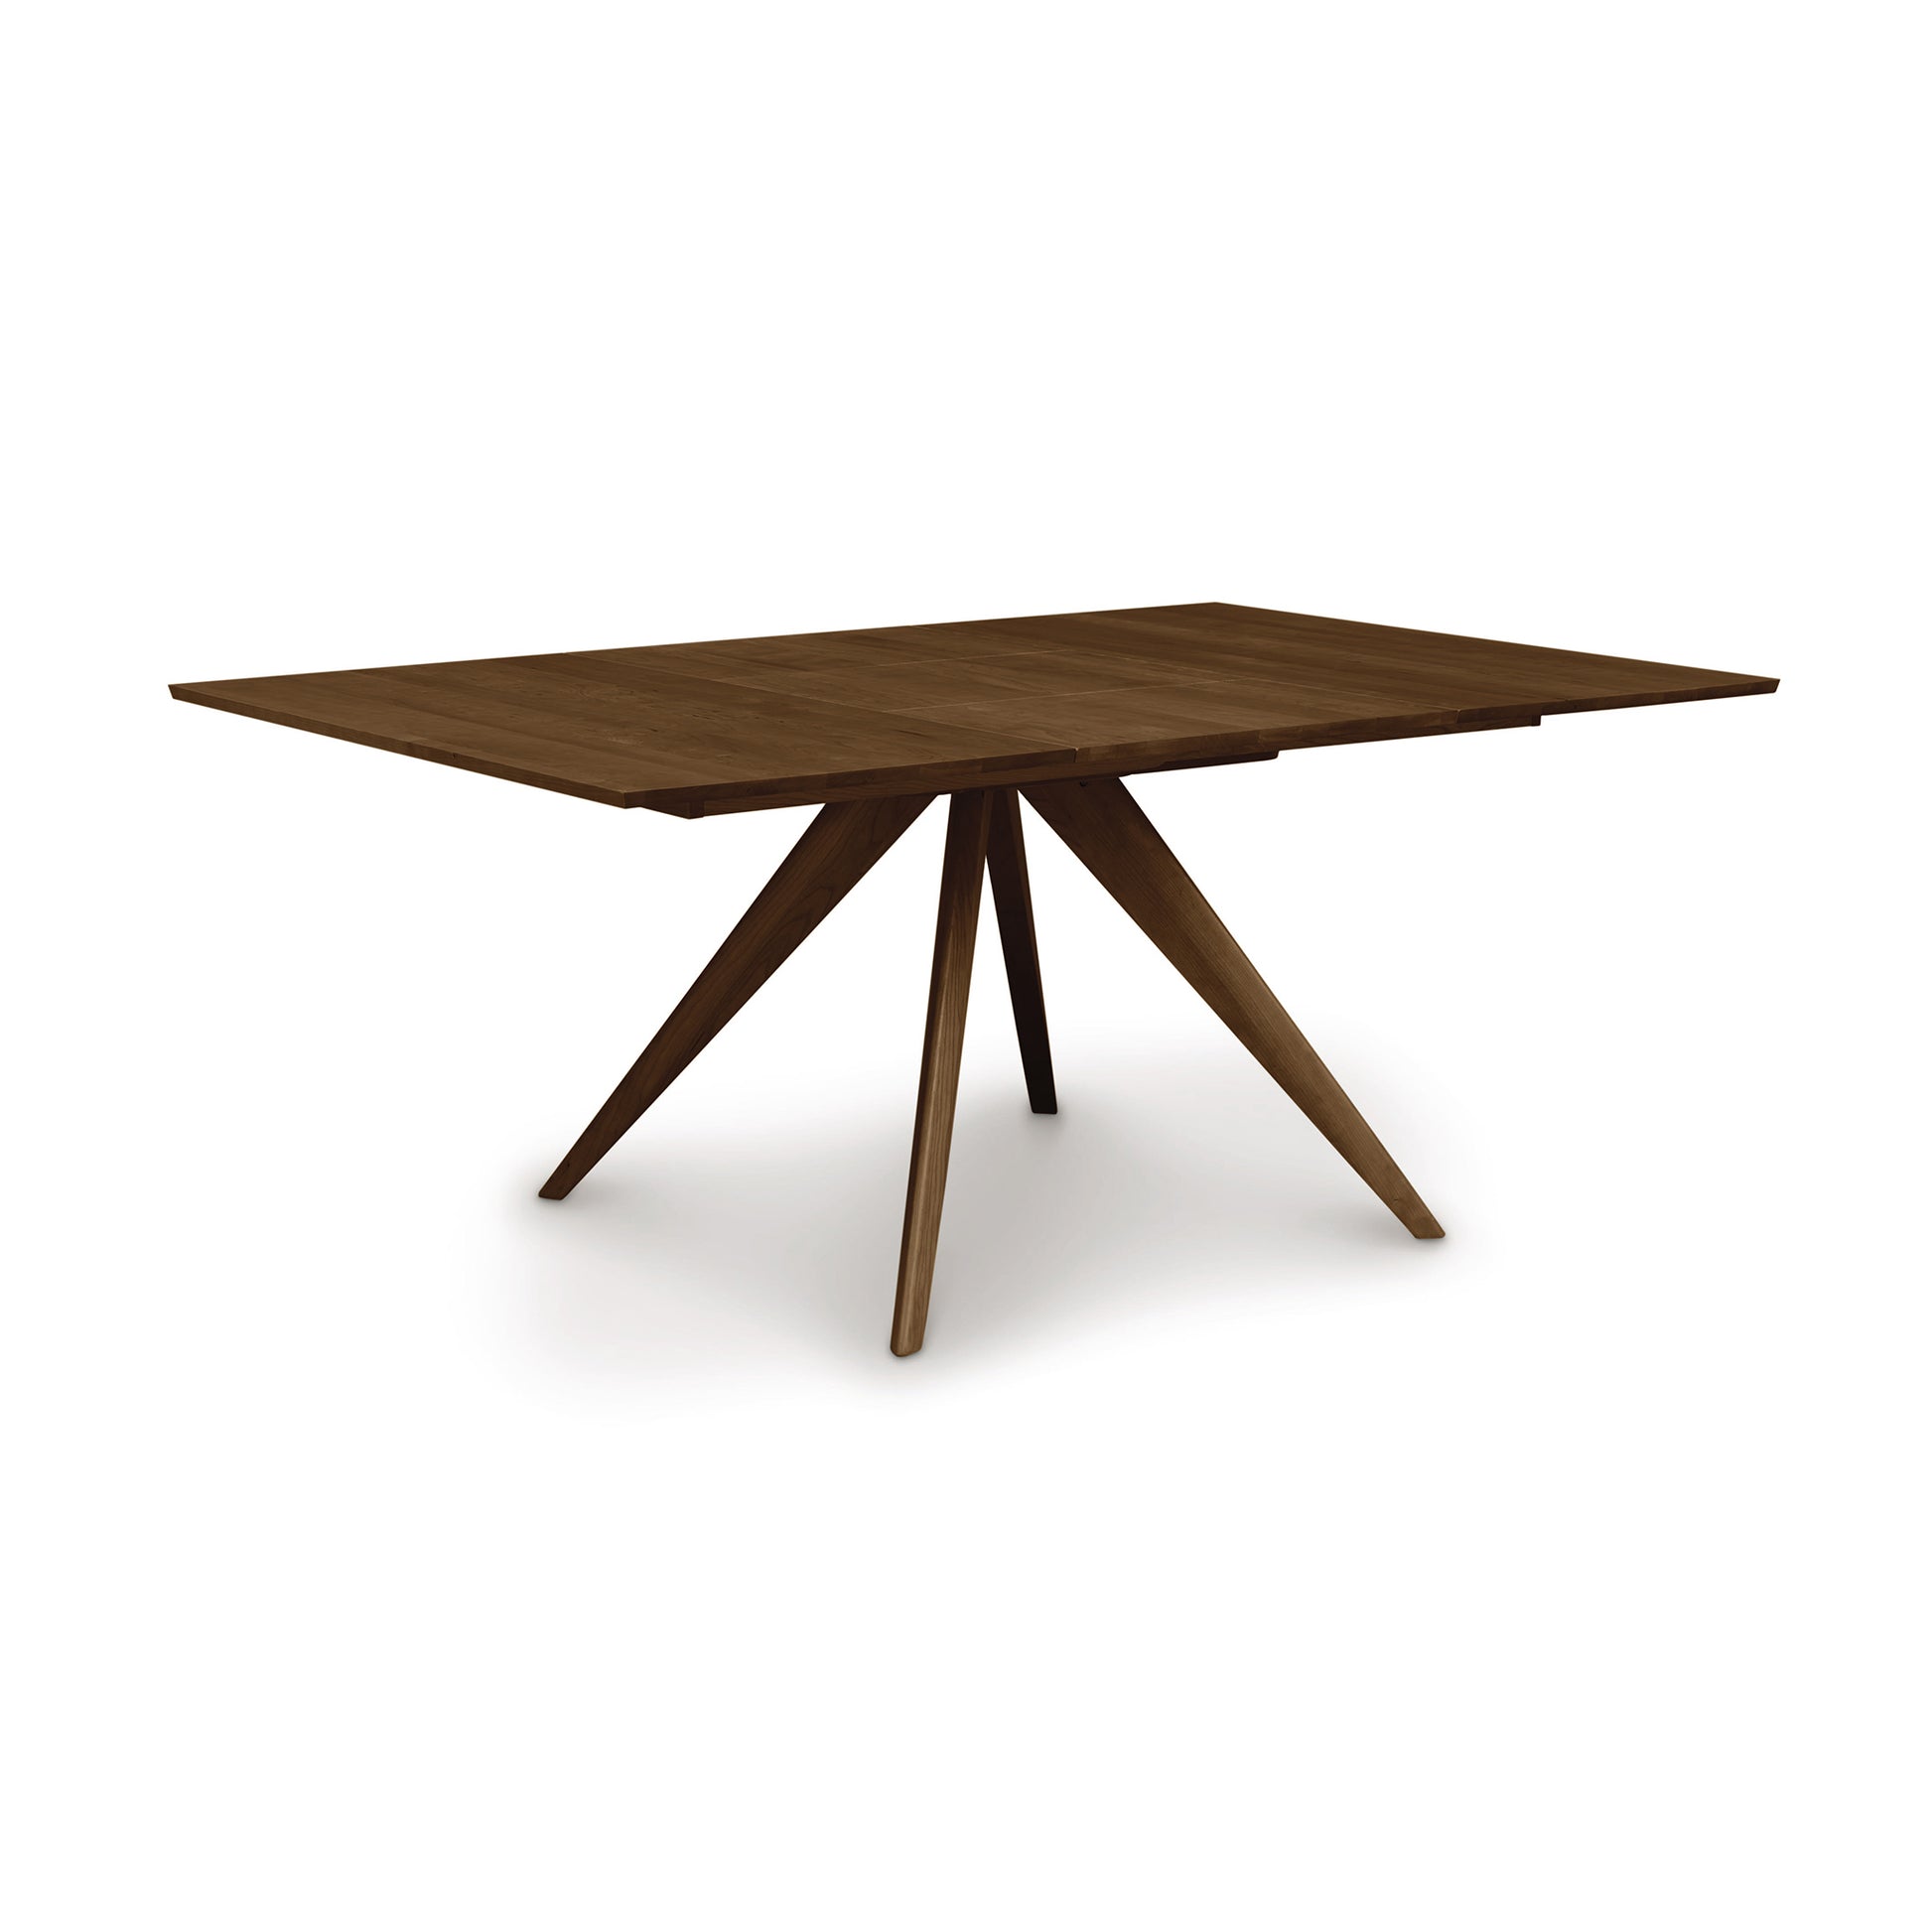 A dining table with two legs and a wooden top.